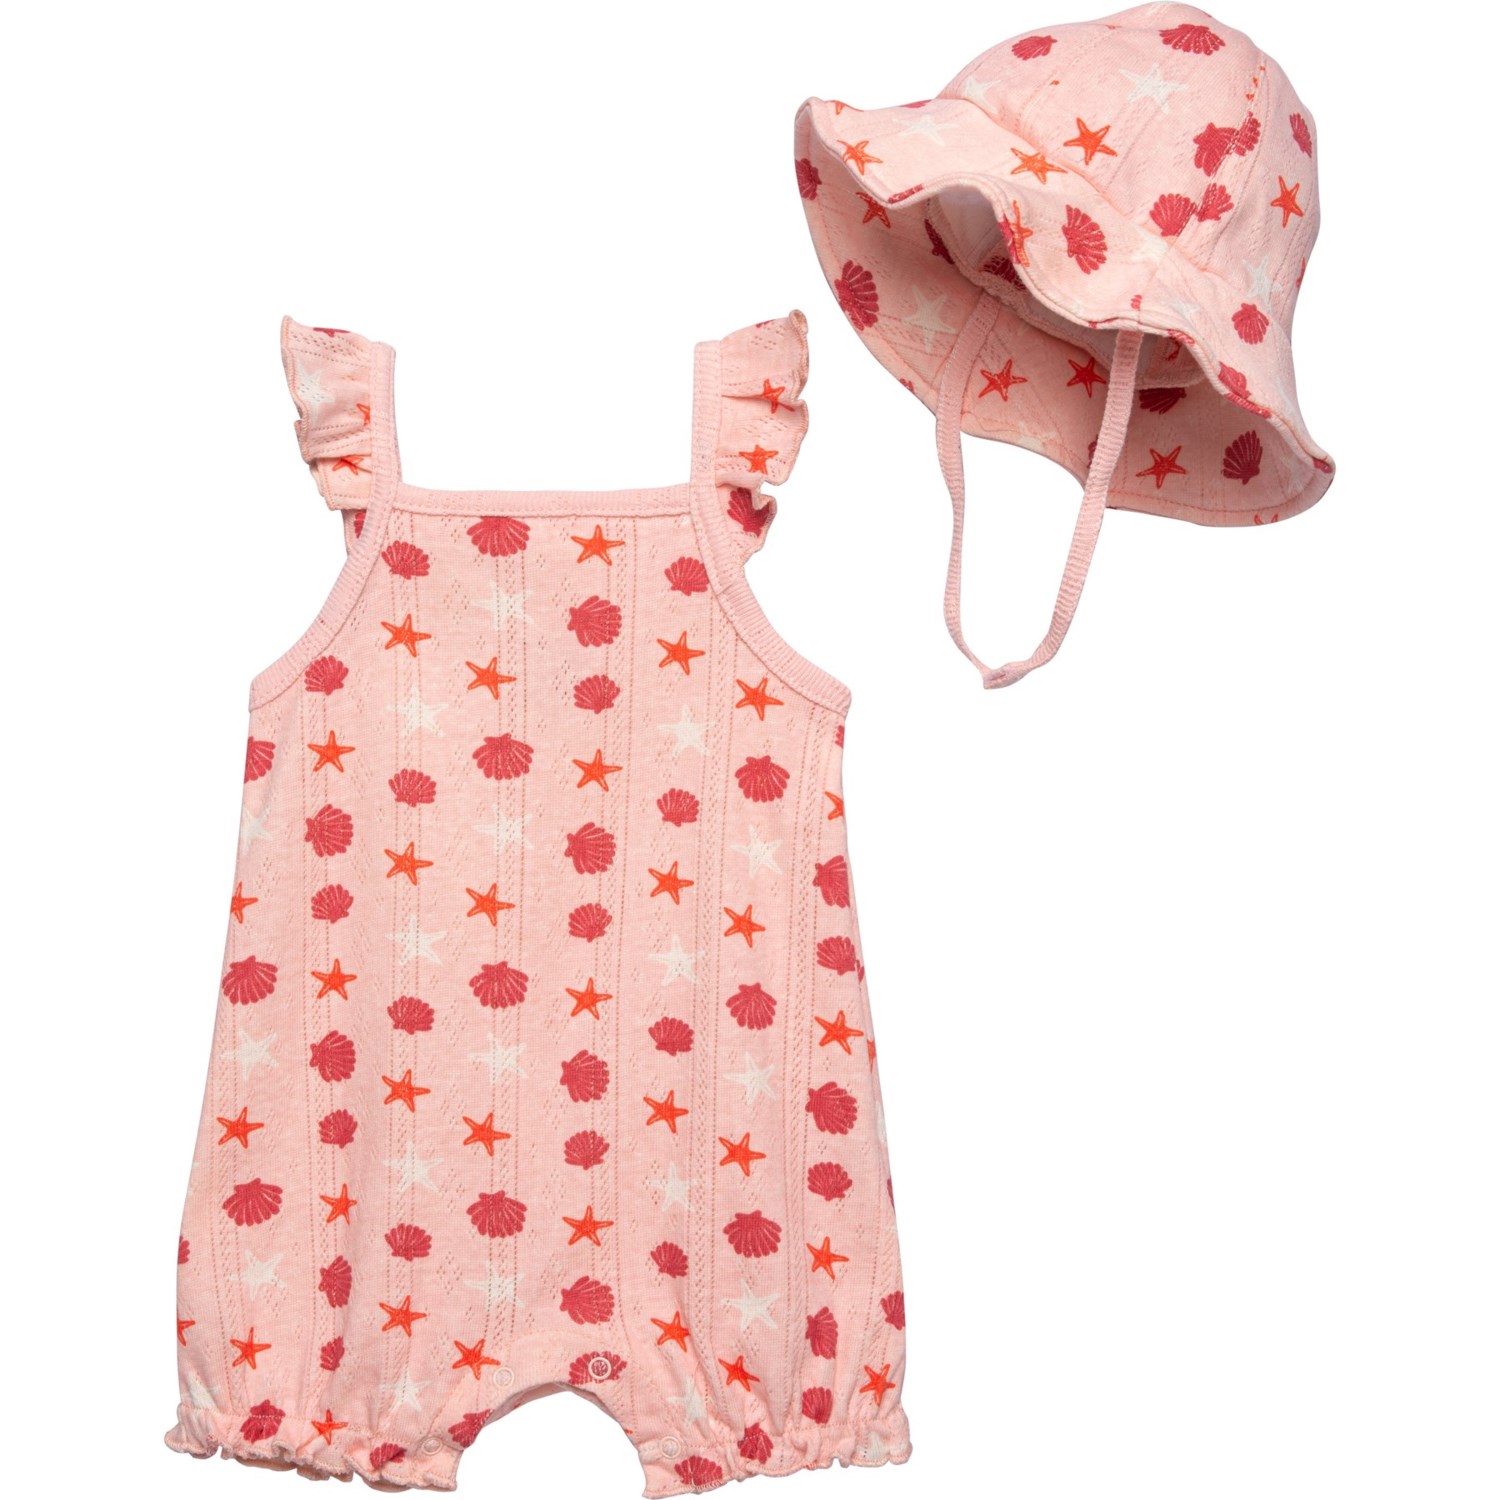 Chick Pea Infant Girls Fashion Romper and Hat Set - Sleeveless